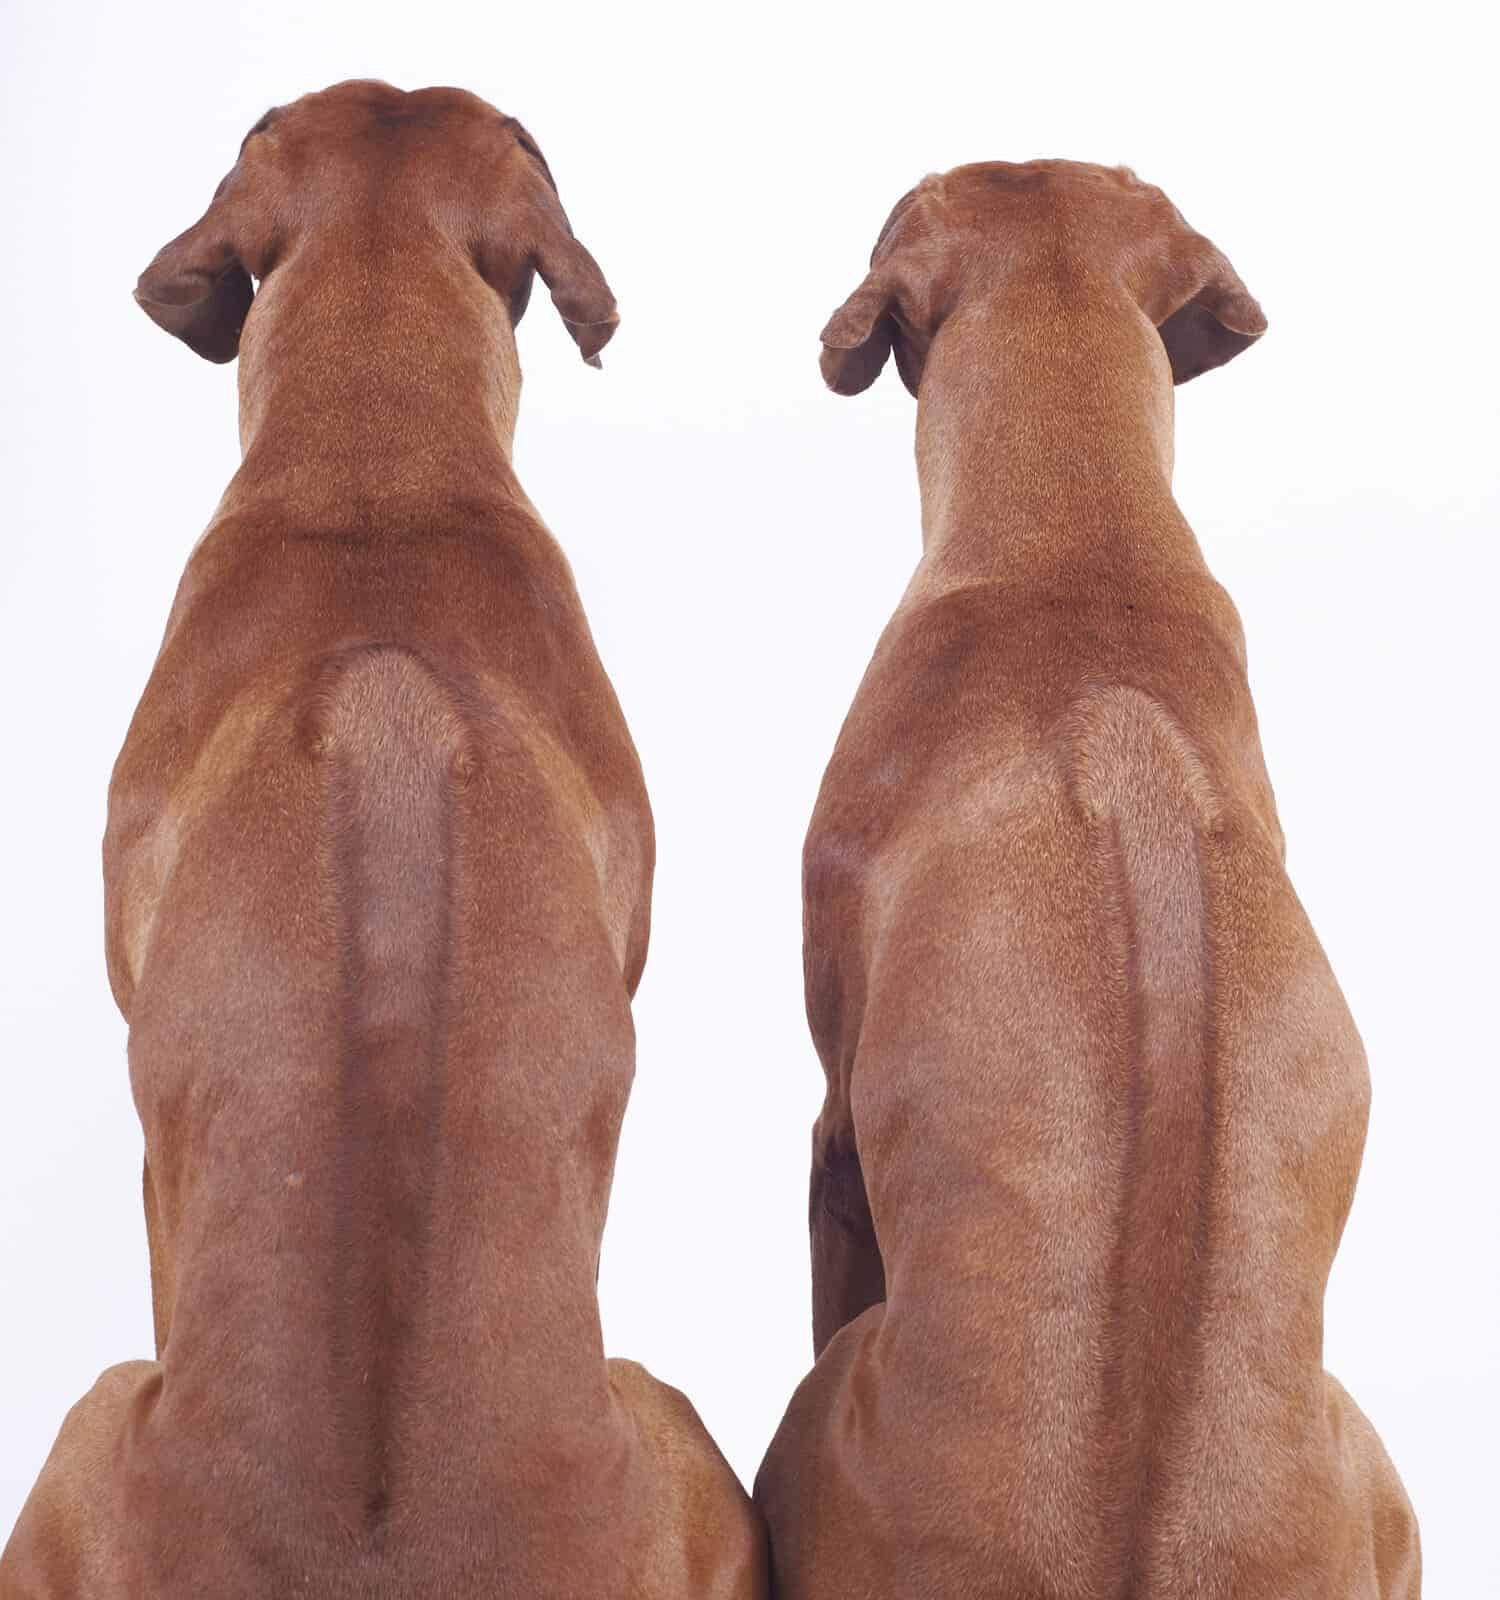 couple of Rhodesian Ridgeback dogs, male 4 years and female 8 years old, image taken from behind ro show their beautiful ridges, image isolated on white background